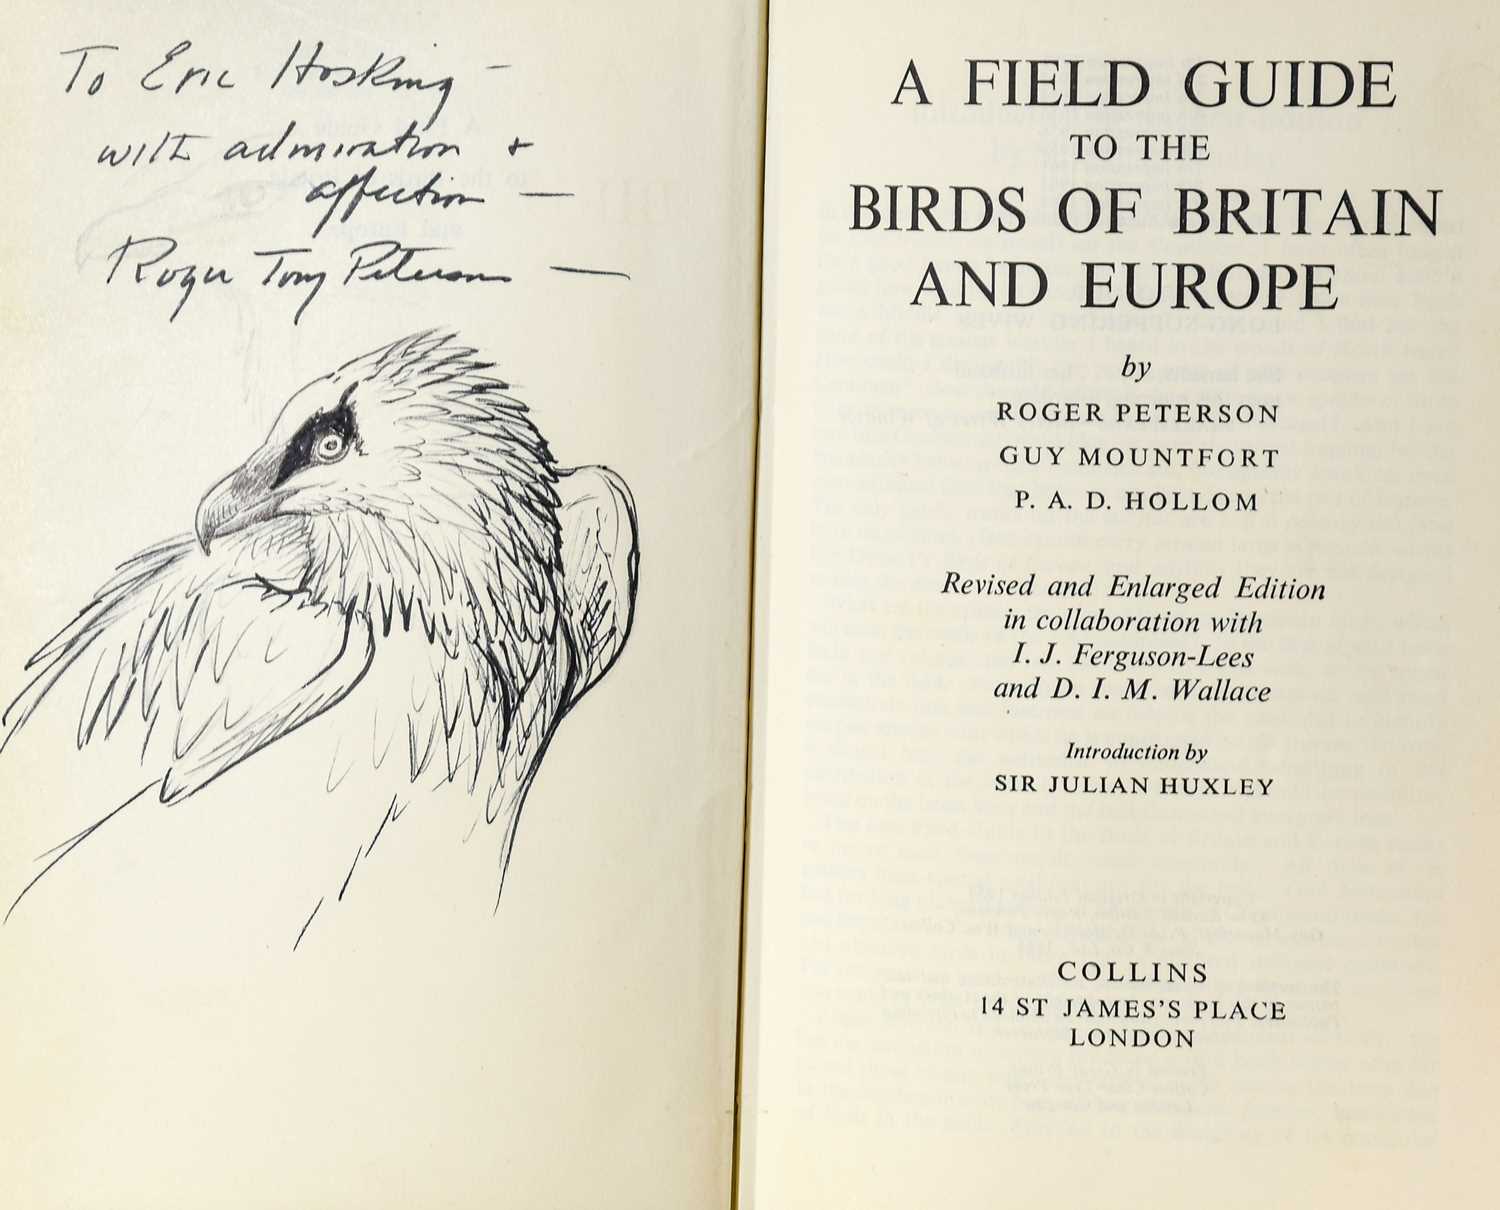 Lot 76 - Peterson (Roger Tory). A collection of his books inscribed to Eric Hosking, c.1950-60